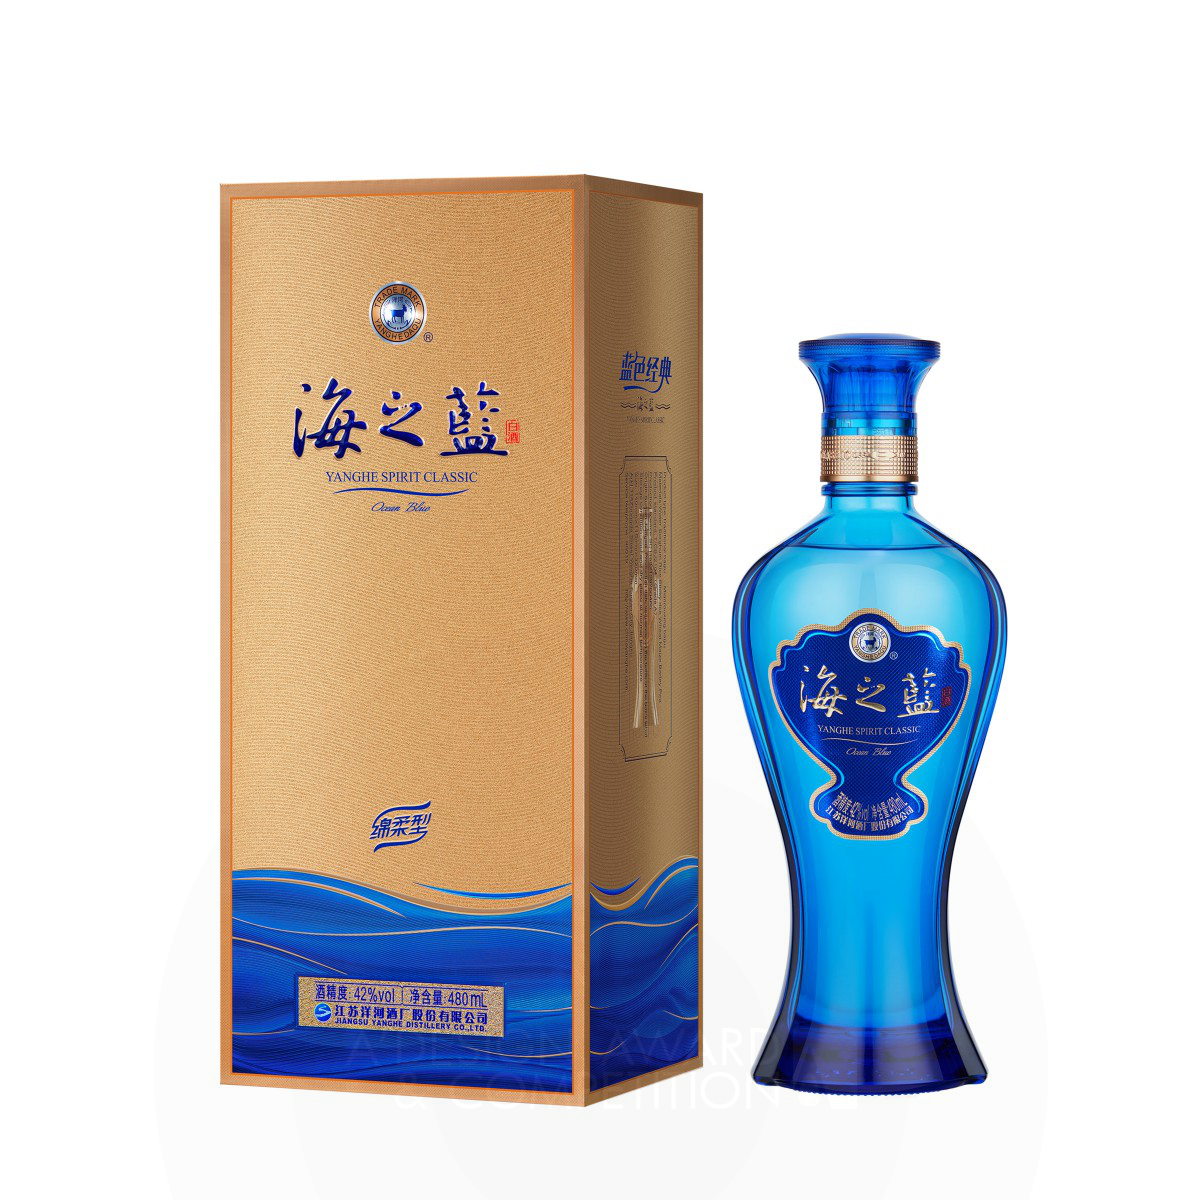 Wen Liu wins Bronze at the prestigious A' Packaging Design Award with Ocean Blue Alcoholic Beverage Packaging.